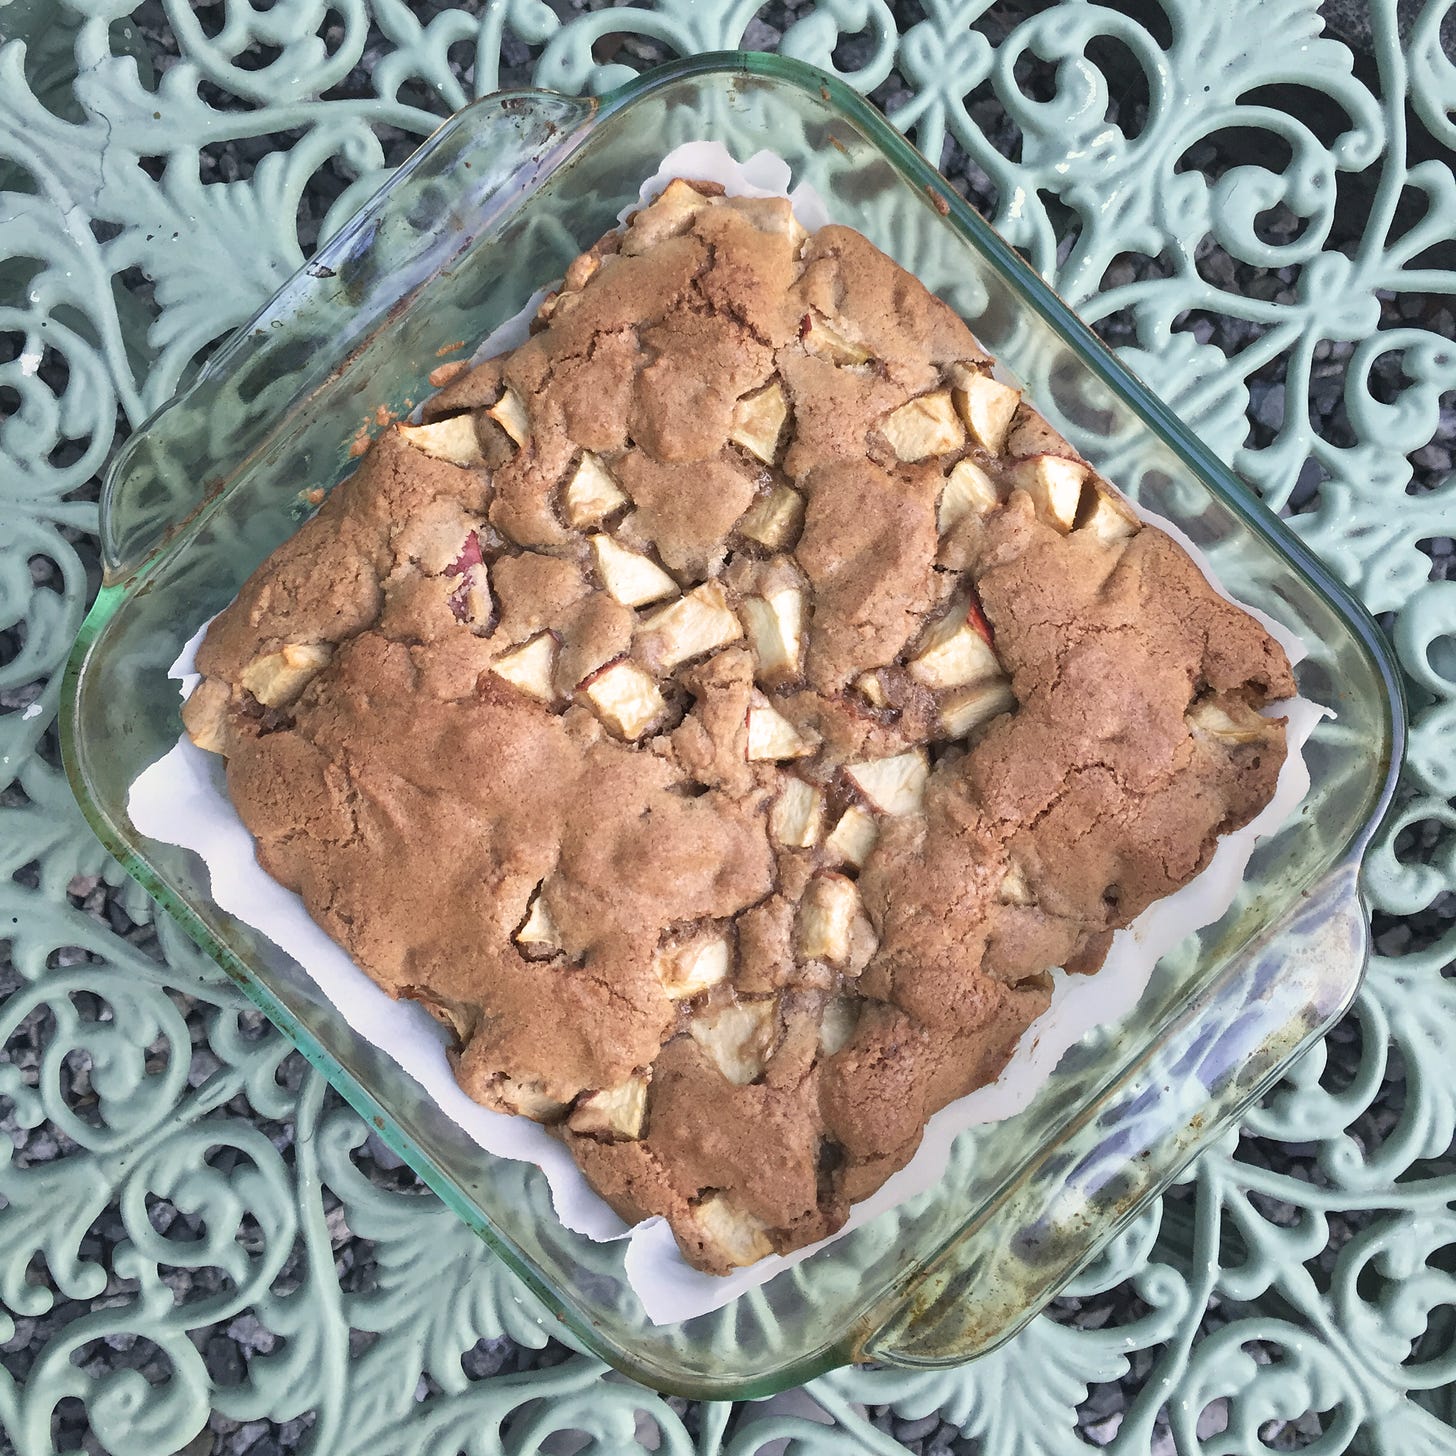 from above, a square glass dish with a browned cake, which has a cracked top and pieces of apple visible throughout.